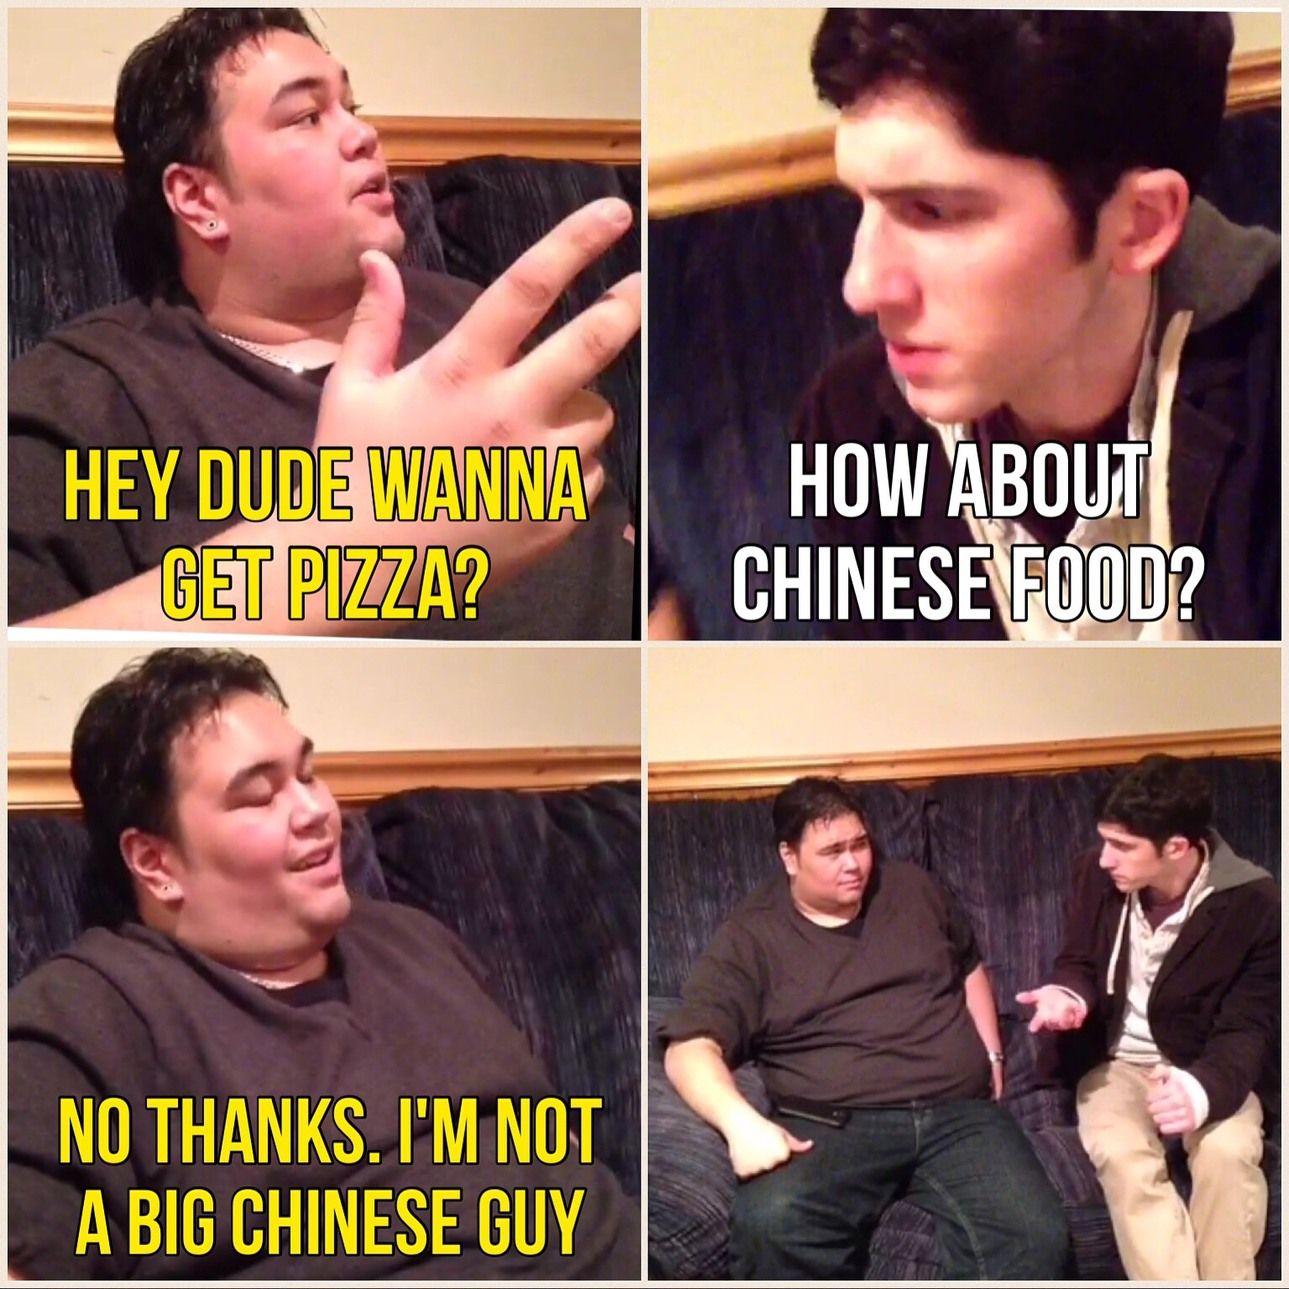 I'm not a big chinese guy